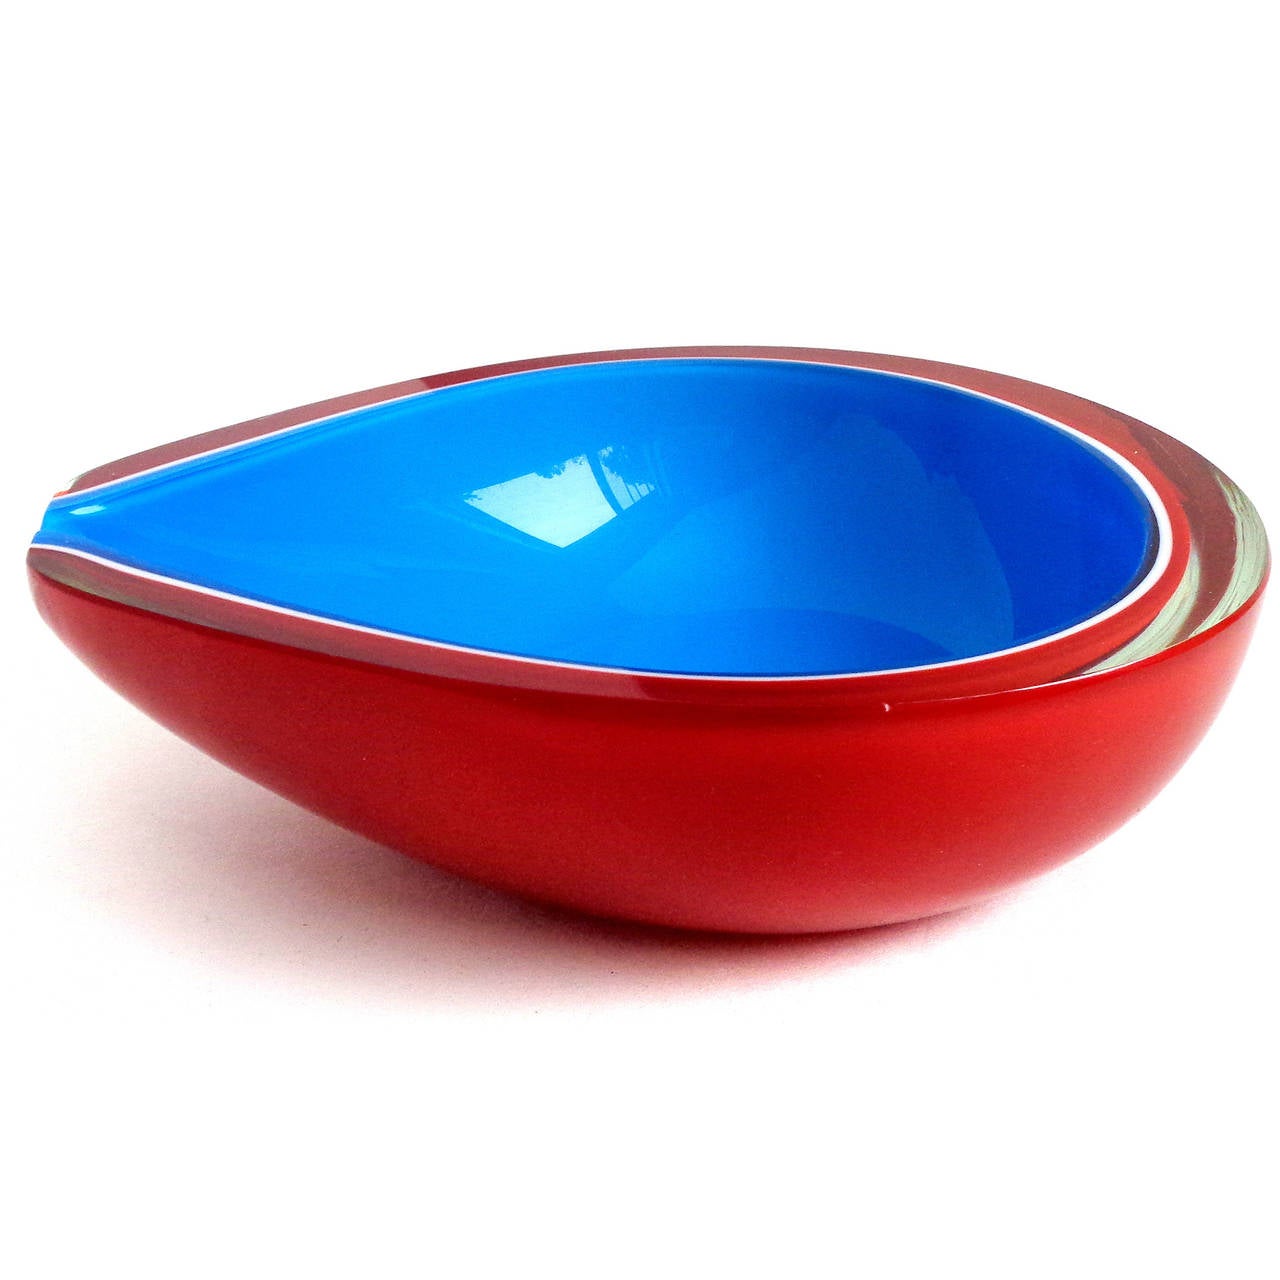 Beautiful Murano handblown bright red, white and blue Italian art glass half pear shaped bowl. Documented to the Fratelli Toso company. The piece has a flat rim, with a flat cut side (on purpose). It is made with four layers of glass. Has remnants